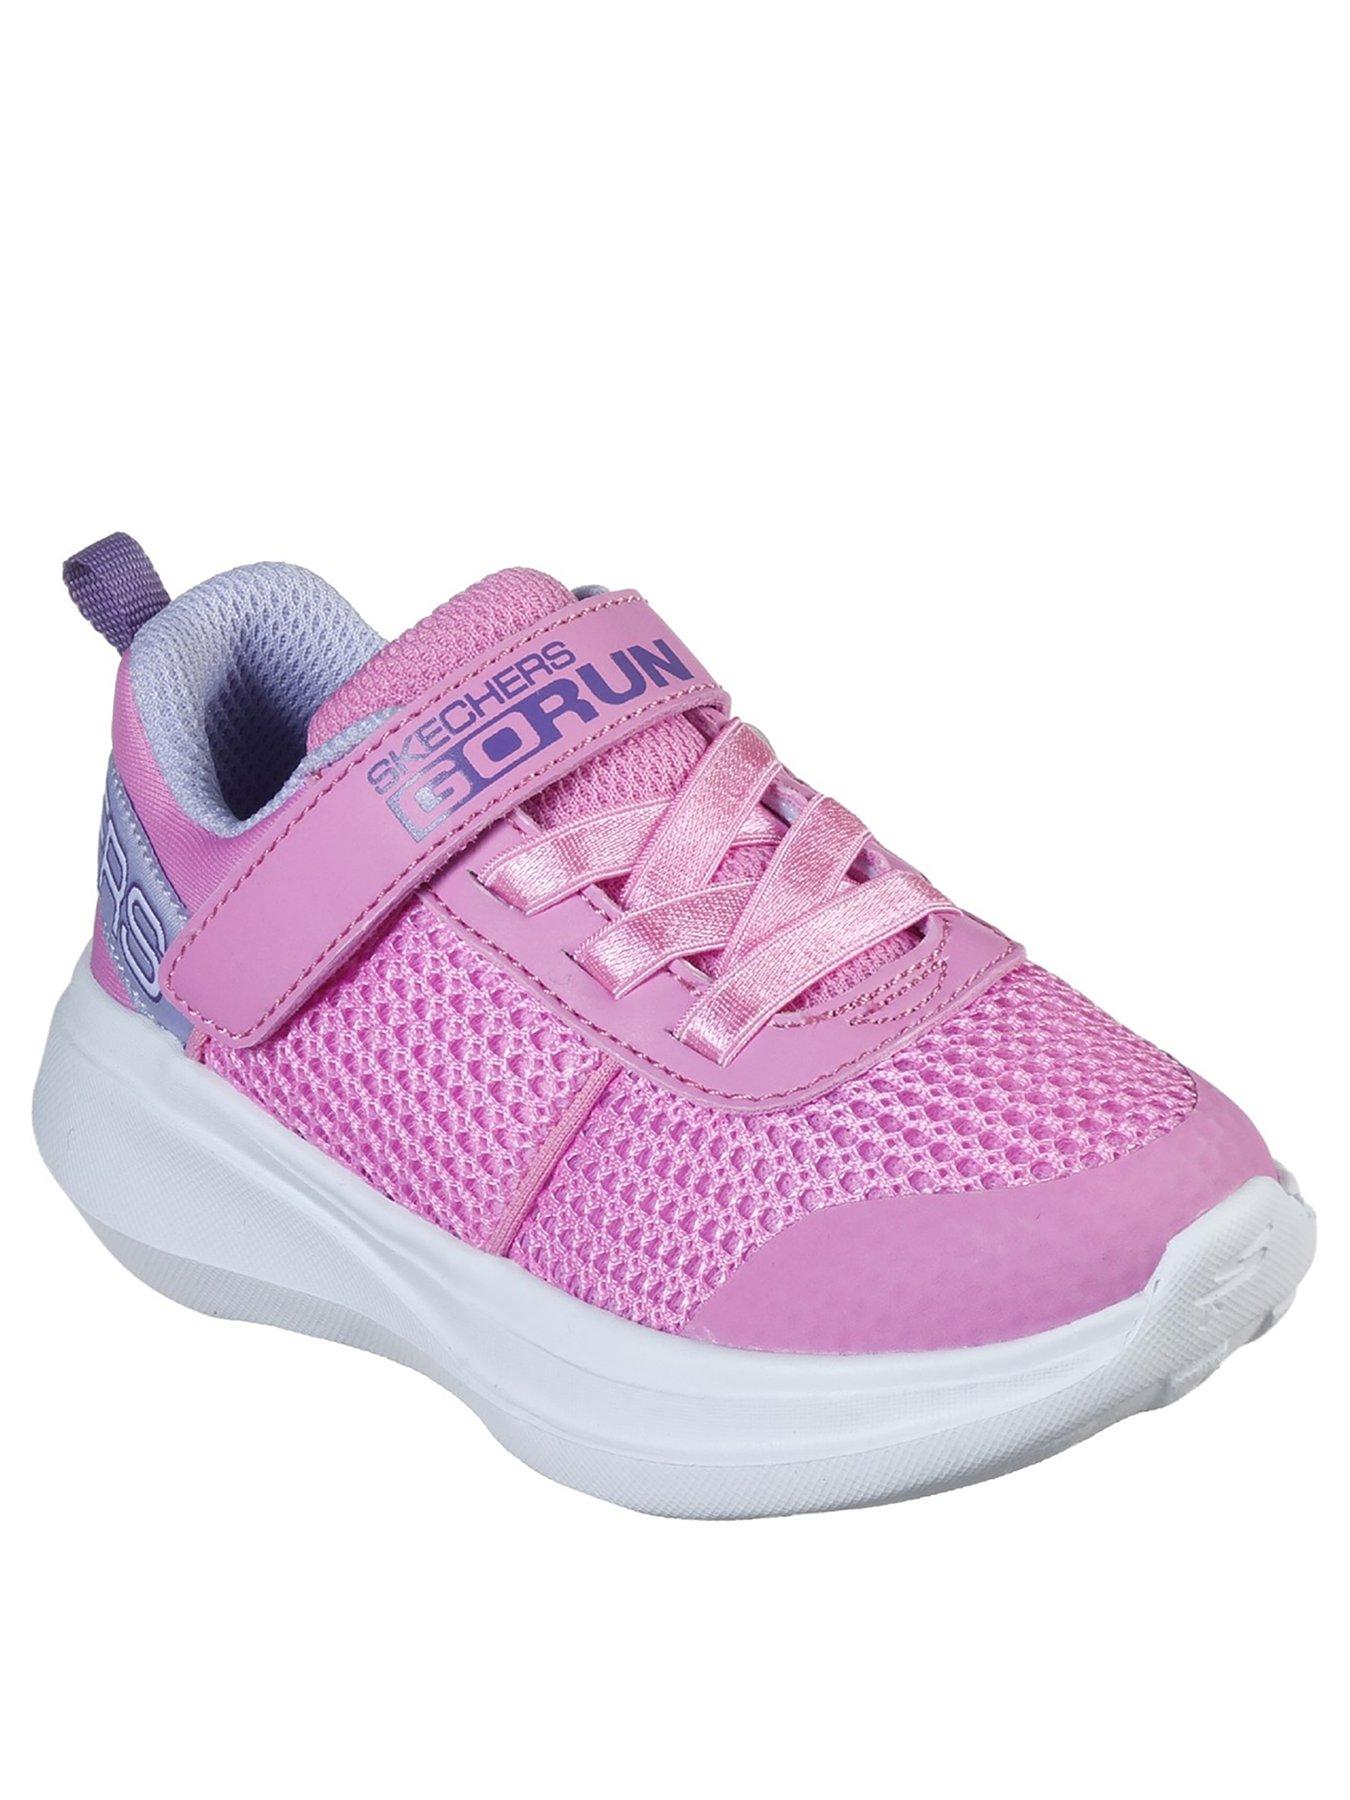 littlewoods girls trainers